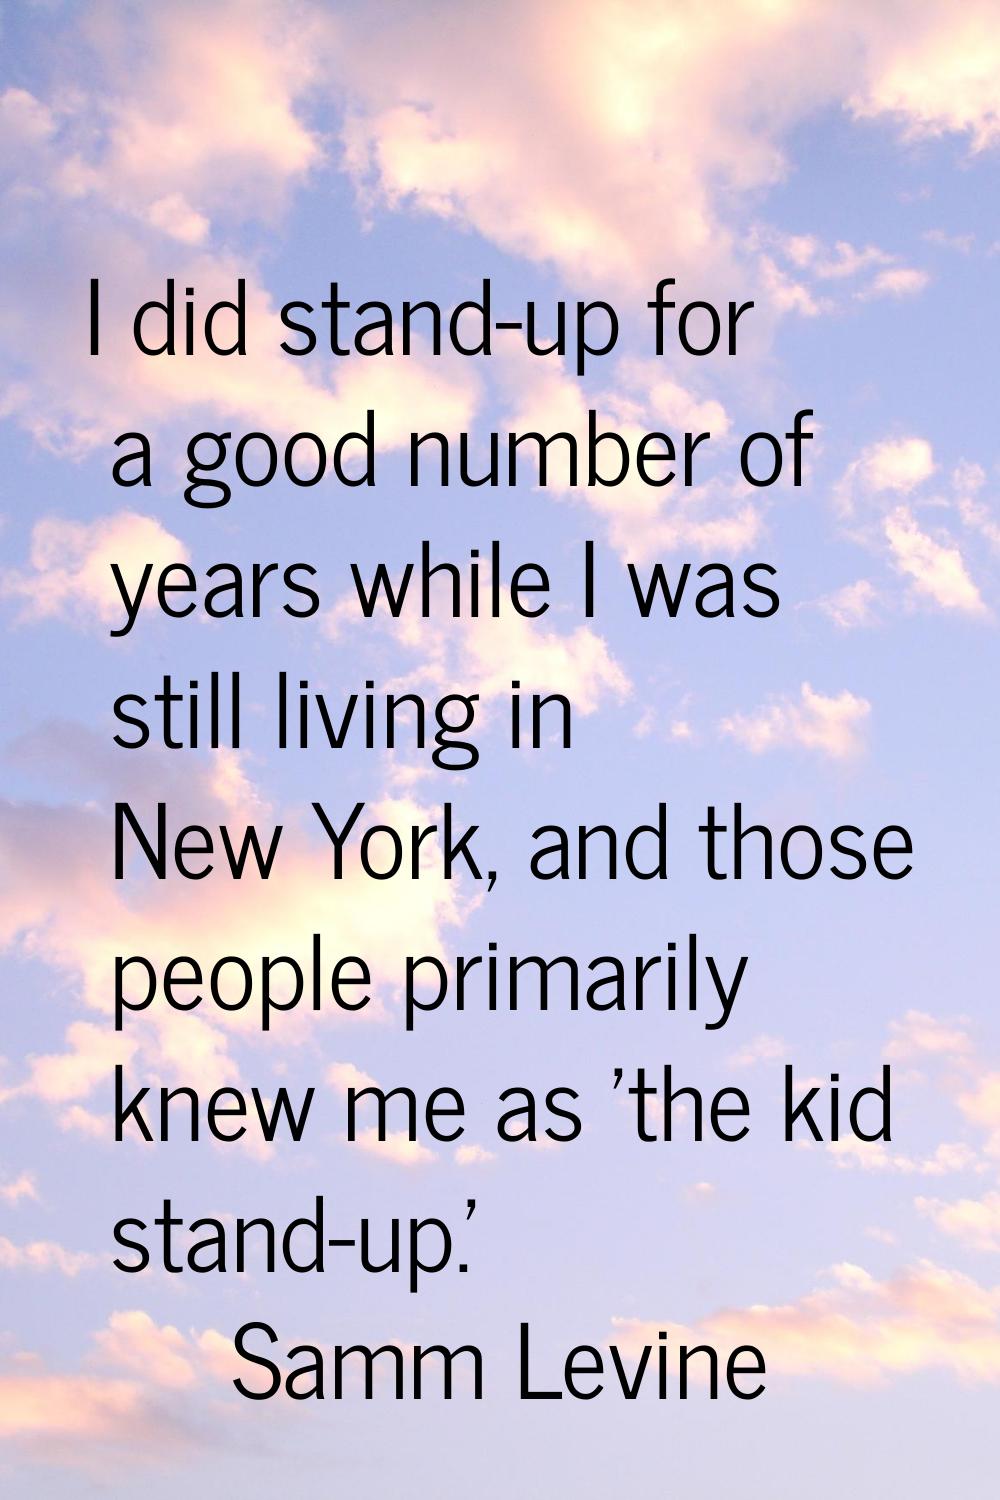 I did stand-up for a good number of years while I was still living in New York, and those people pr